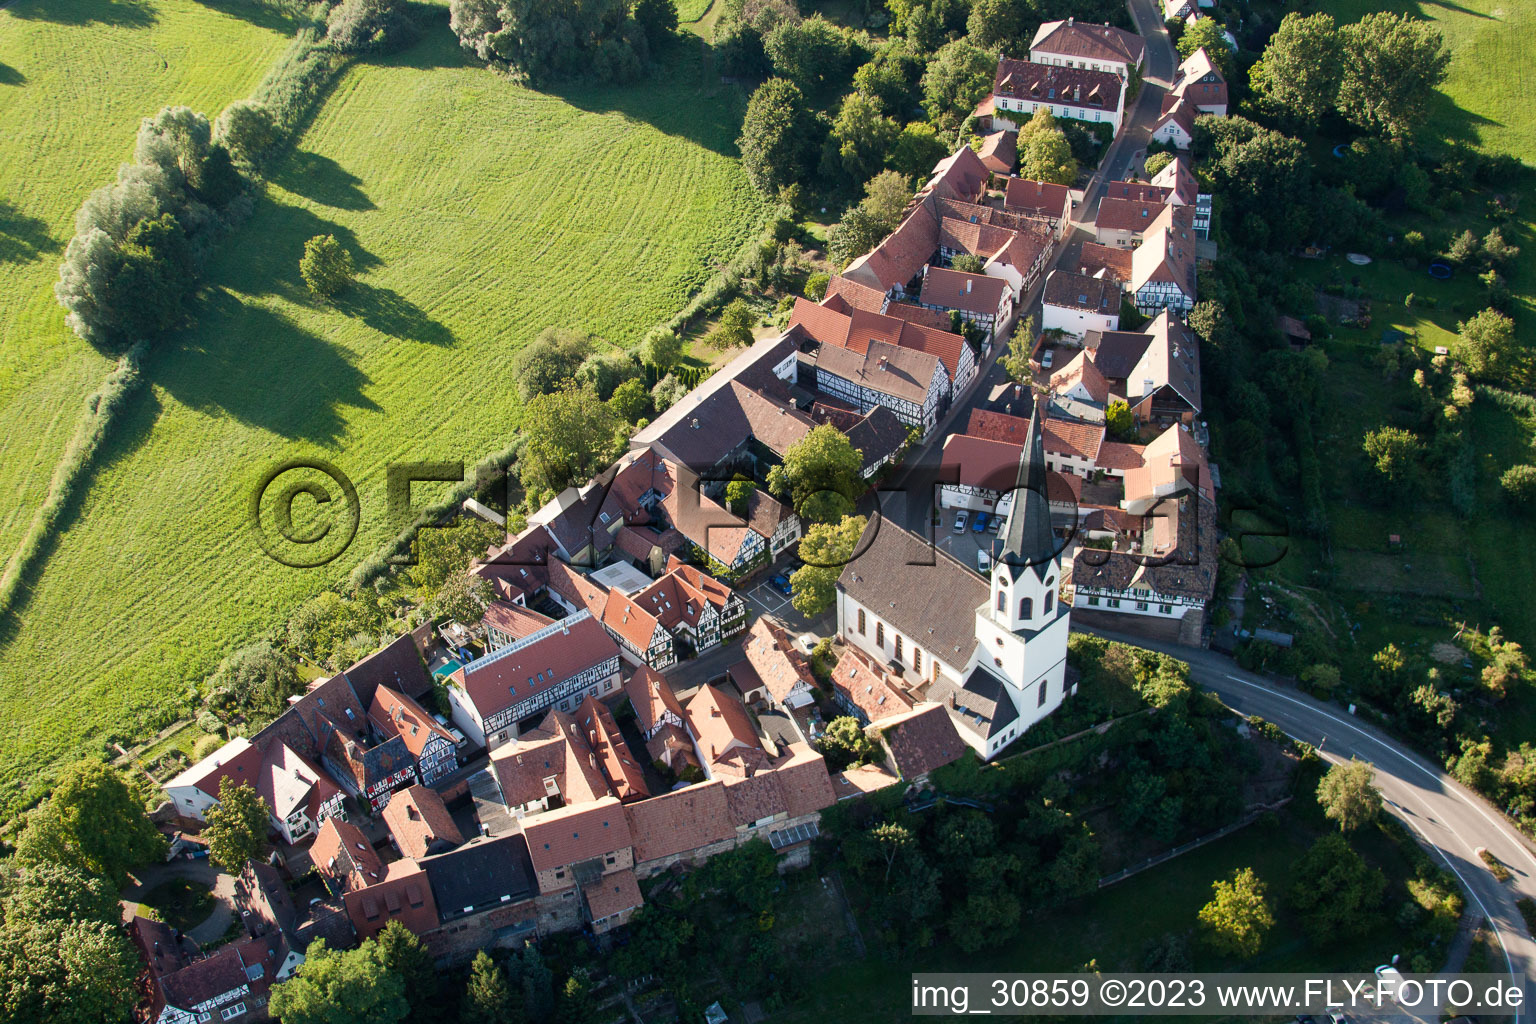 Aerial photograpy of Ludwigstr in Jockgrim in the state Rhineland-Palatinate, Germany